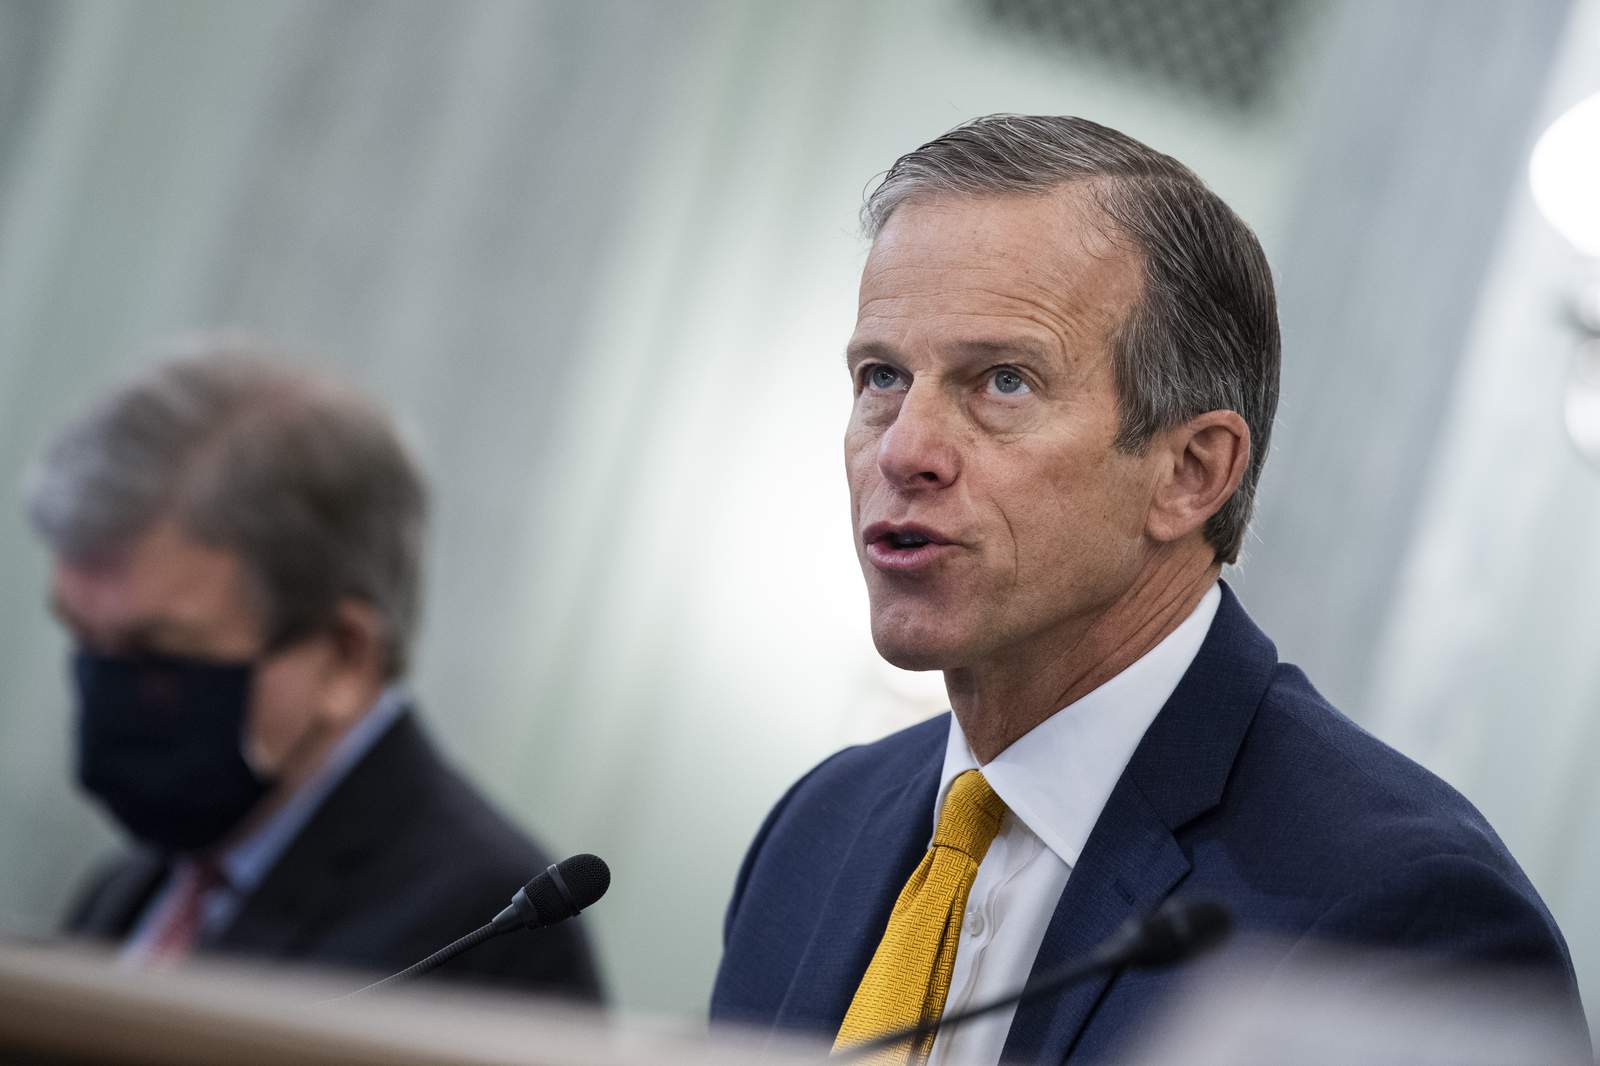 GOP's Thune says Trump allies engaging in 'cancel culture'